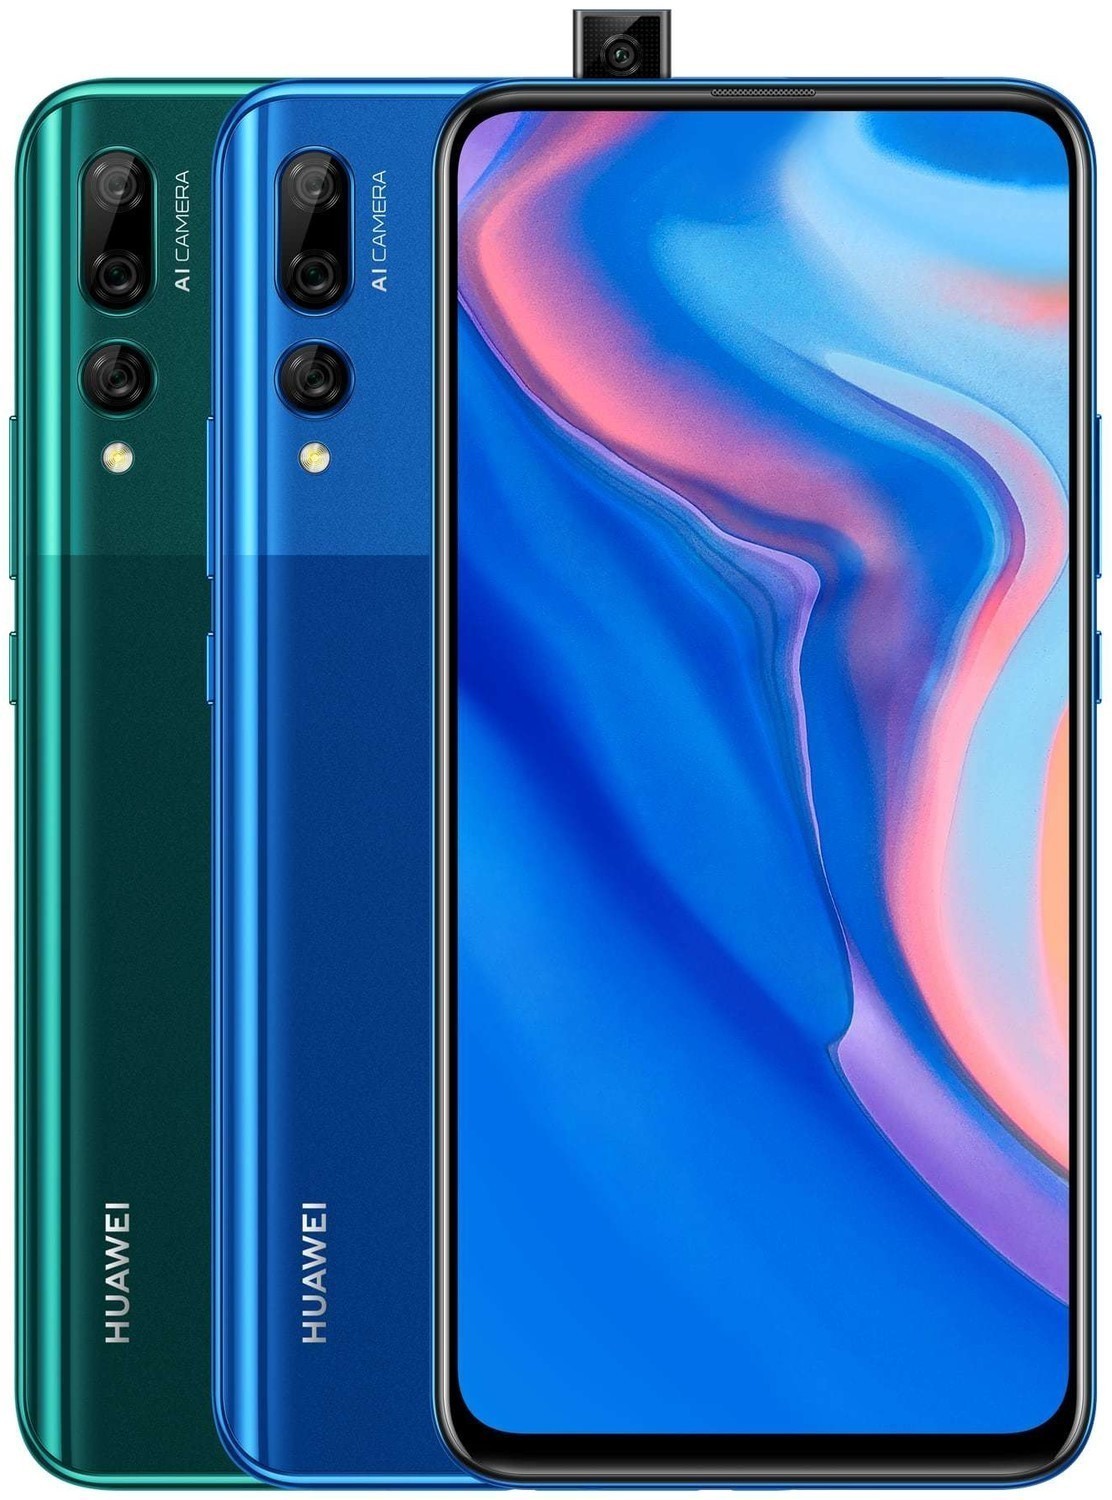 Huawei Y9 Prime (2019) 128GB - Specs and Price - Phonegg